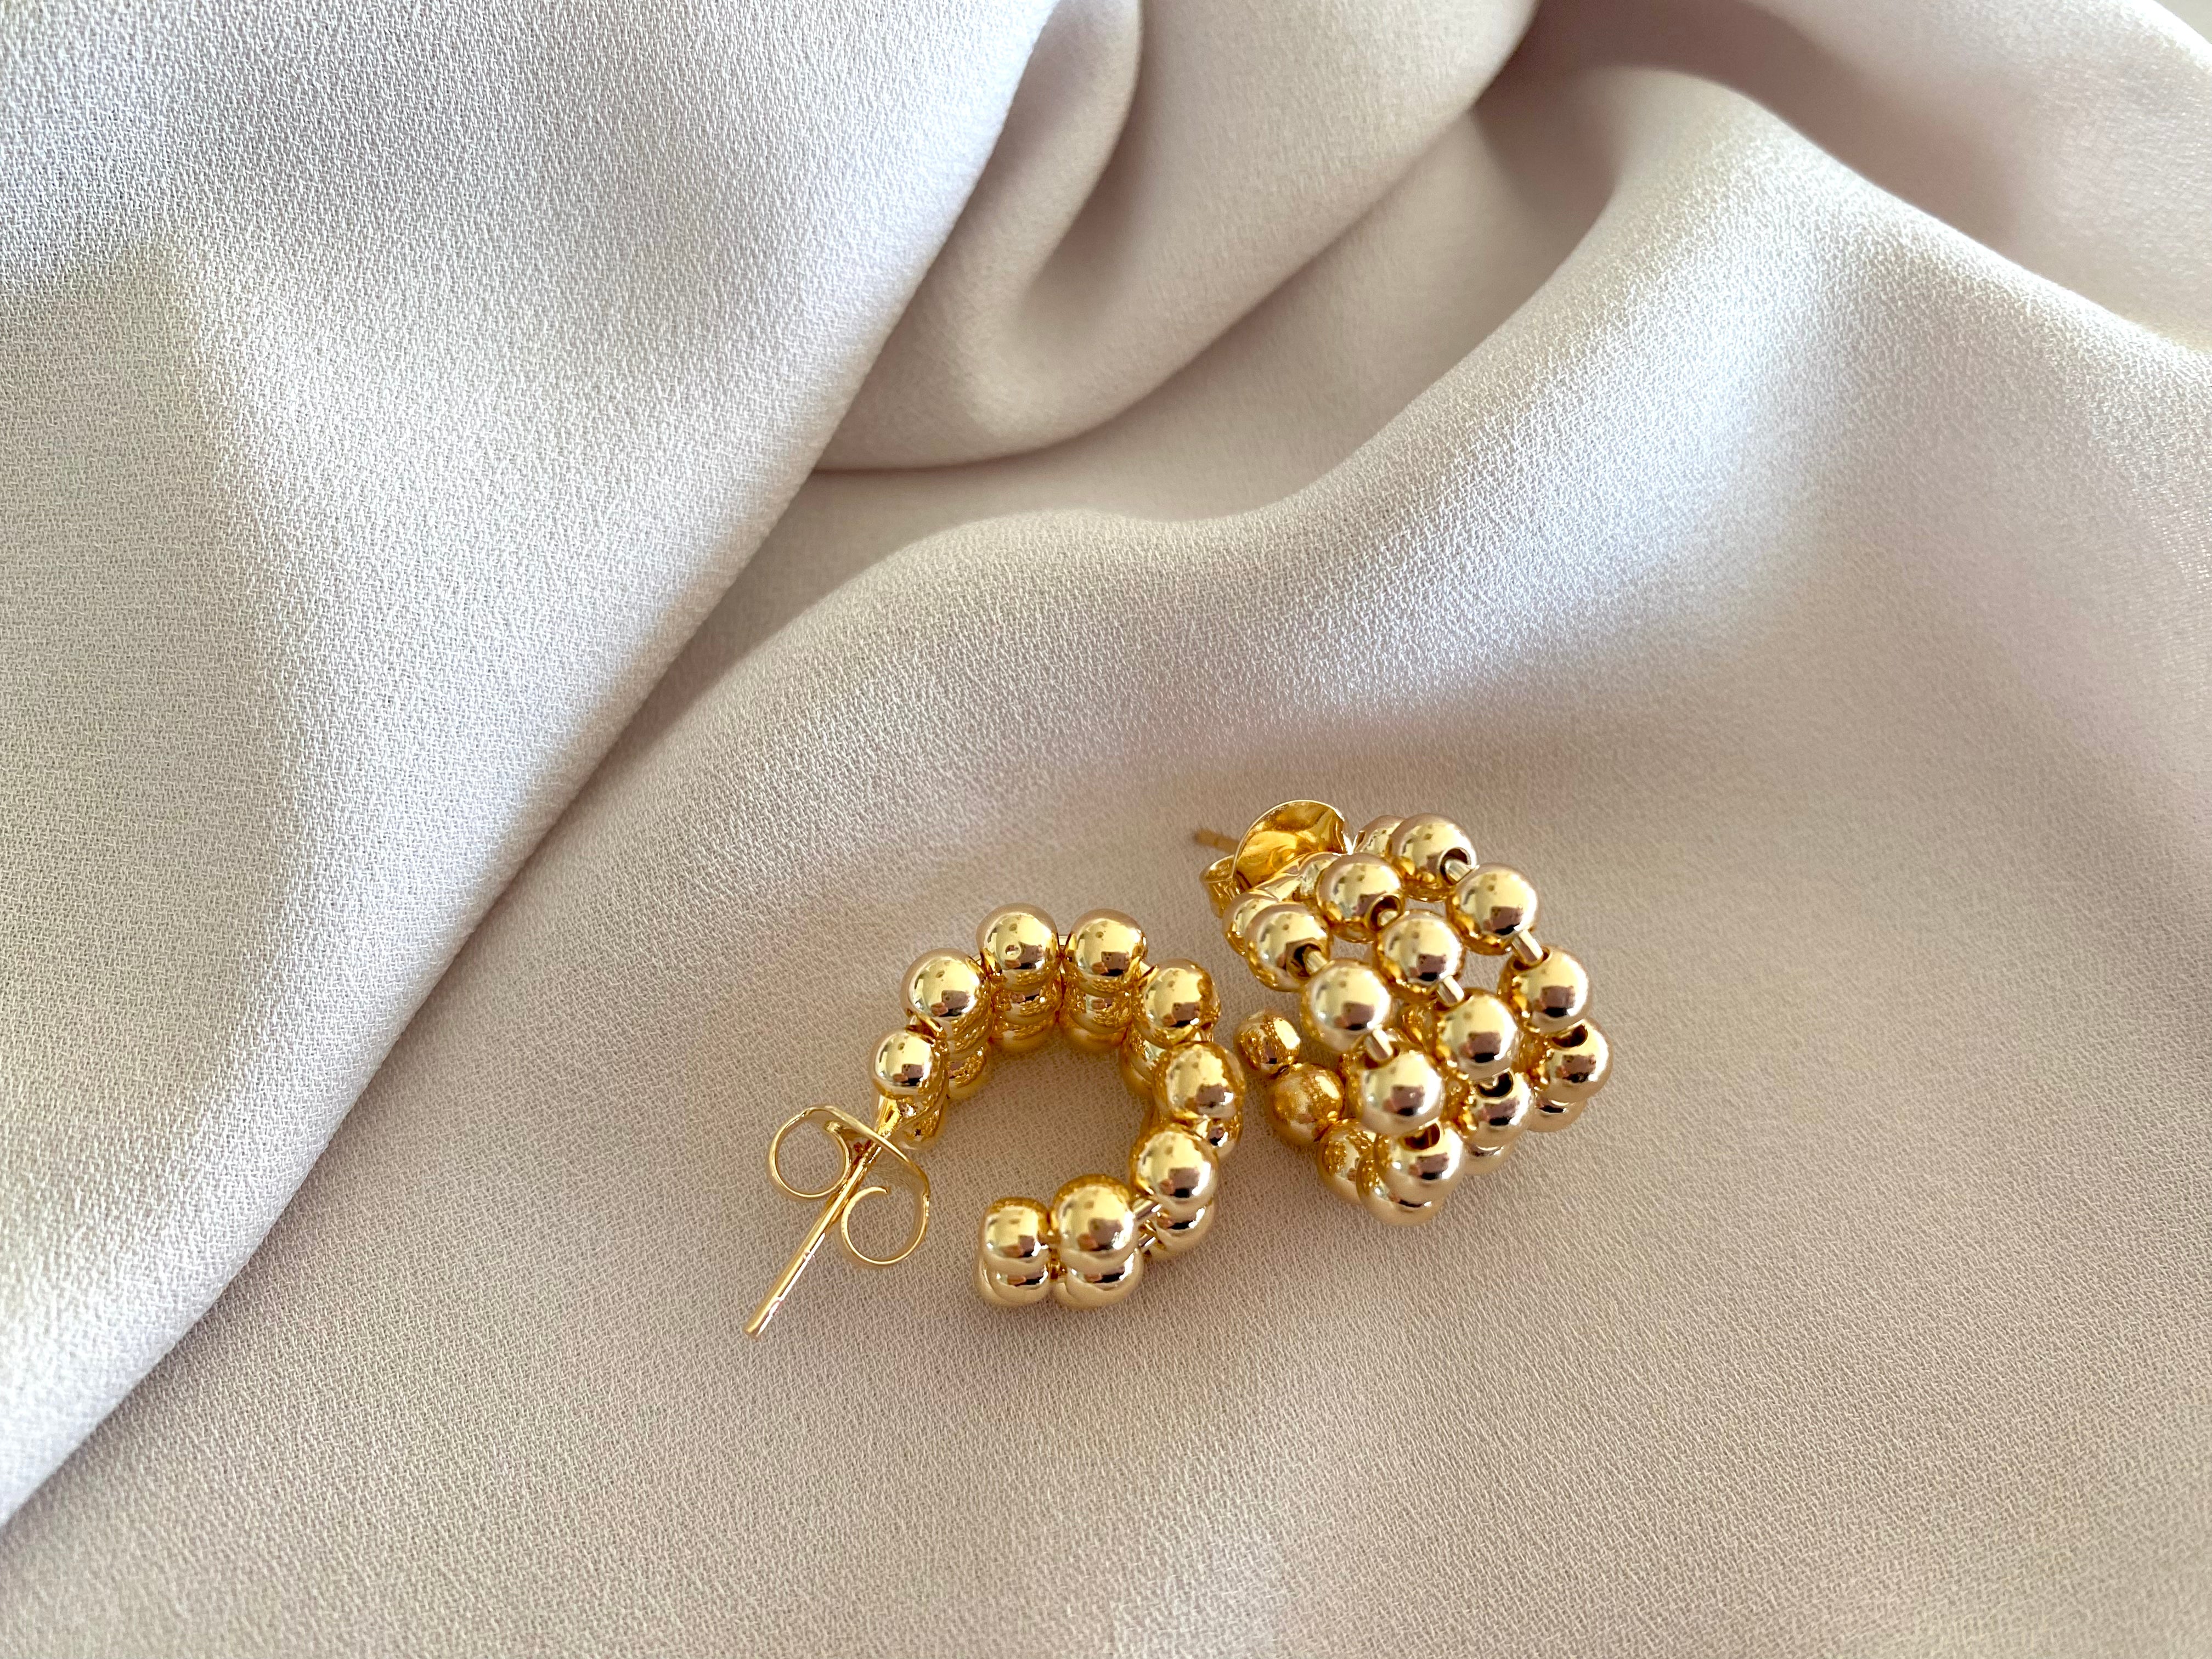 Beaded Hoop Earrings Gold Filled Hoops Chunky Hoop Earrings Christmas Gifts Simple Gold Earrings Unique Statement Jewelry Layered Rings Hoop